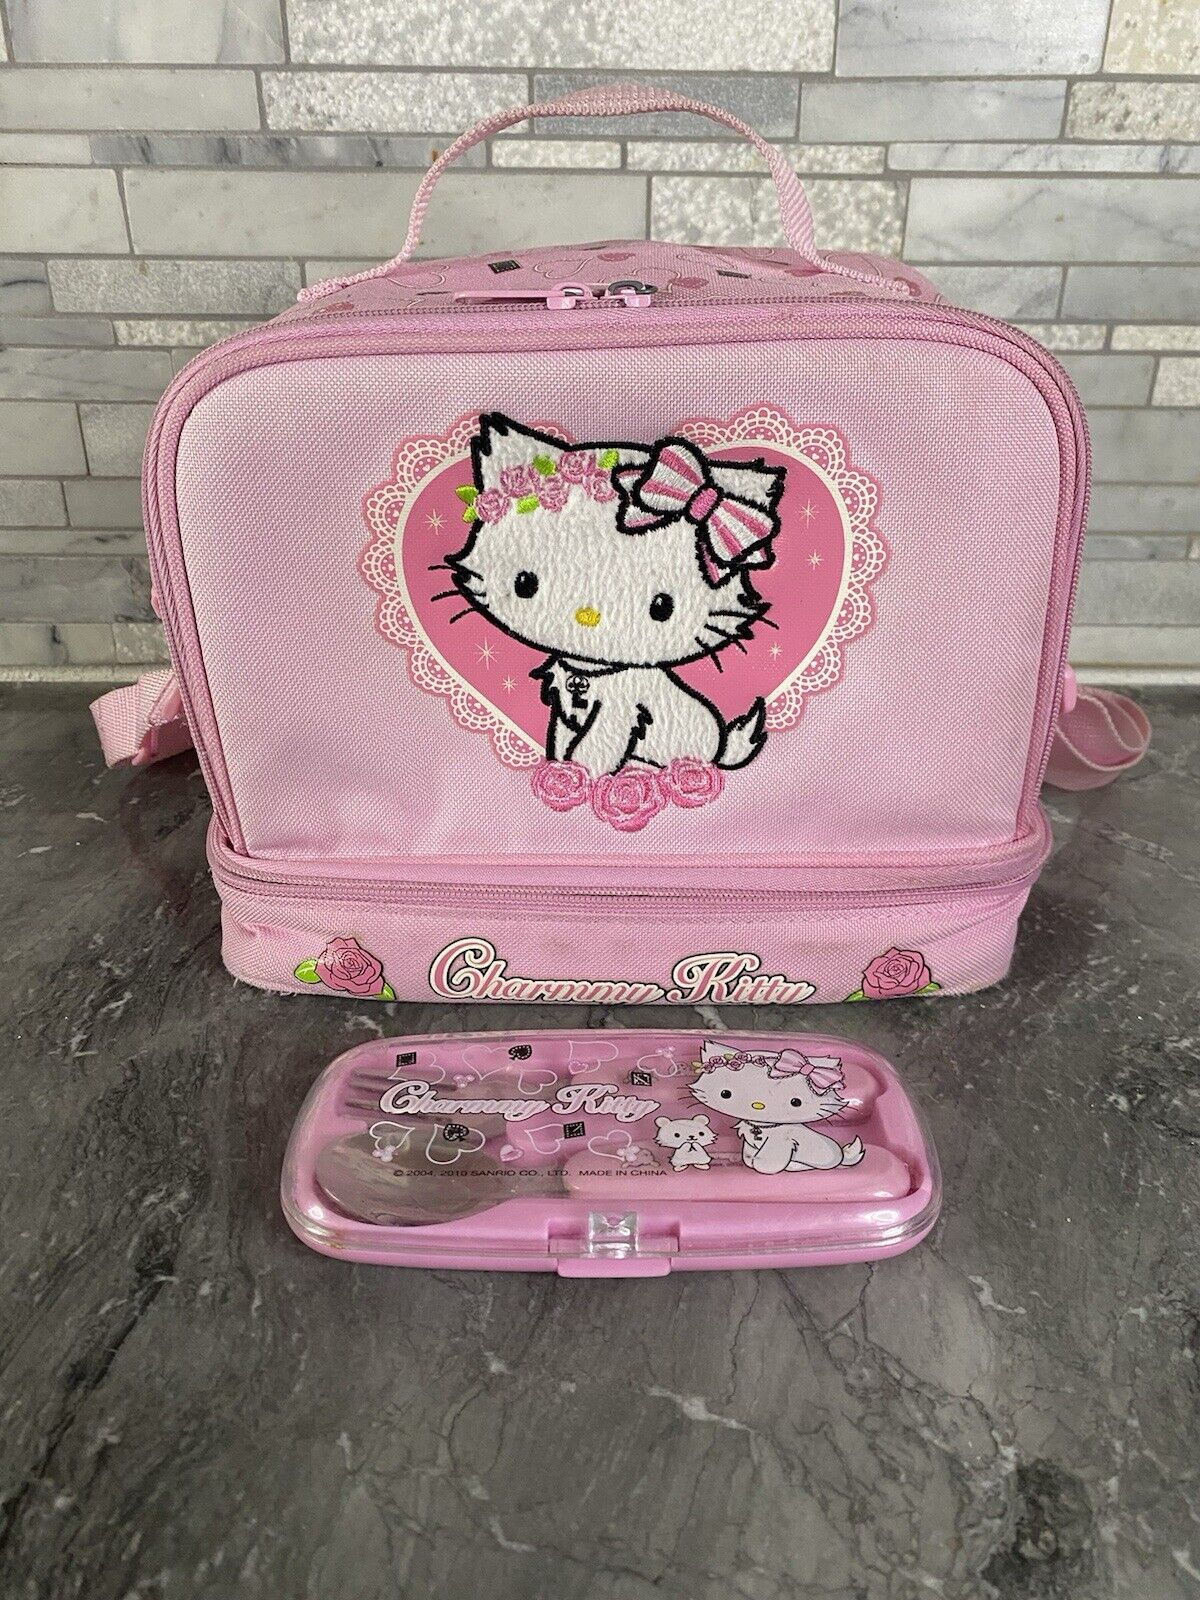 Sanrio Charmmy Charmy Kitty Lunch Box Bag Pink Cat Rose W/ Utensils (Rare)